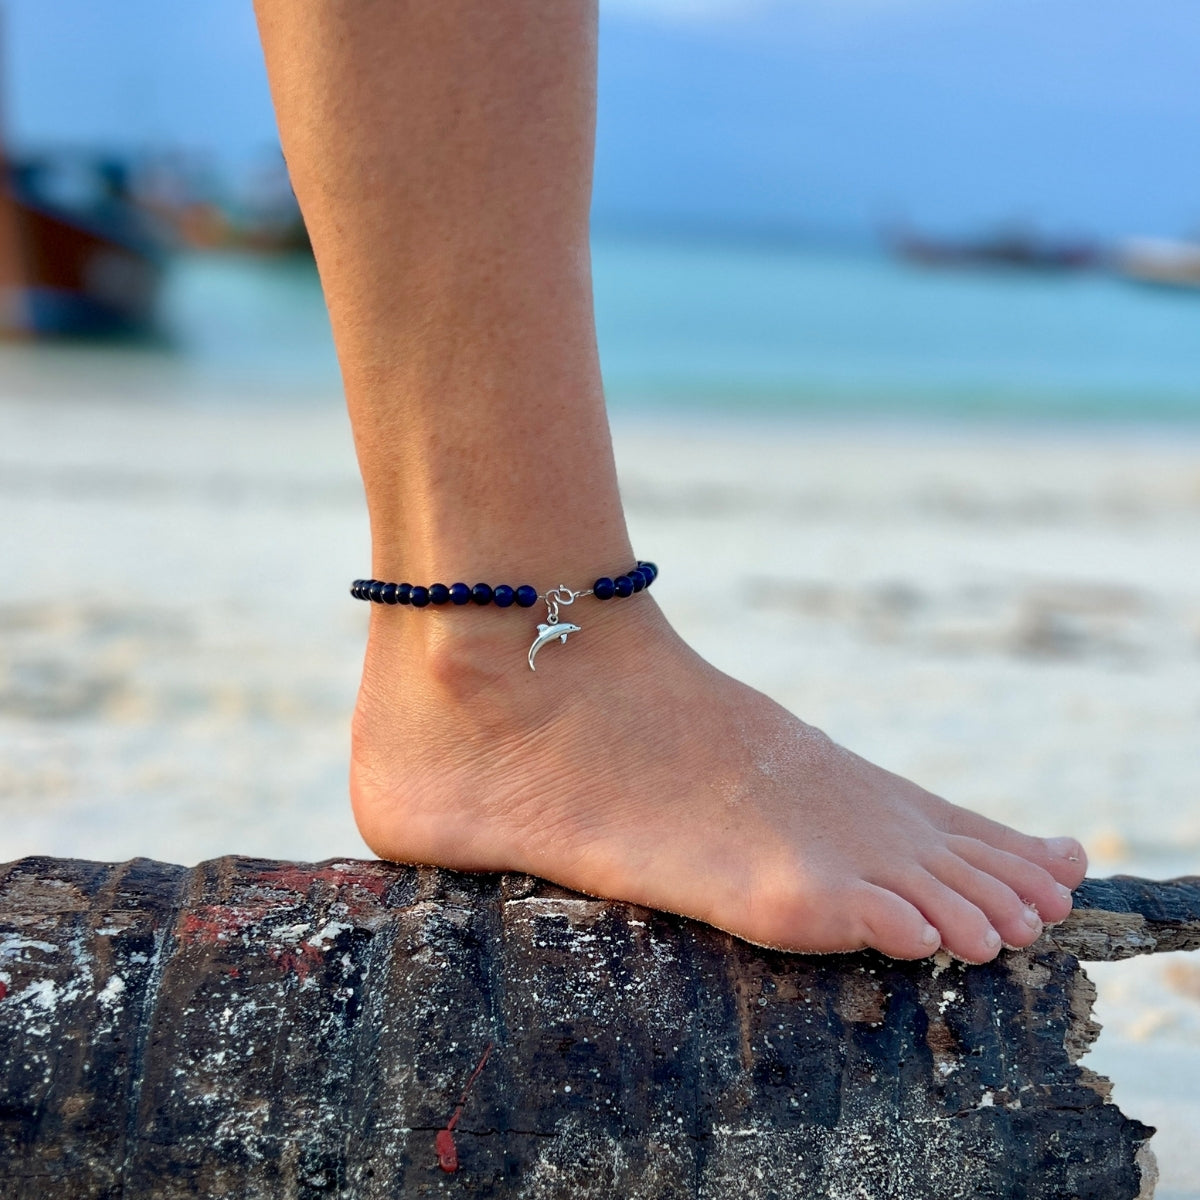 Slip on the Dolphin Spirit Anklet and let the magic of the beach accompany you wherever you roam. It's a symbol of your love for the sea and your carefree, barefoot soul.